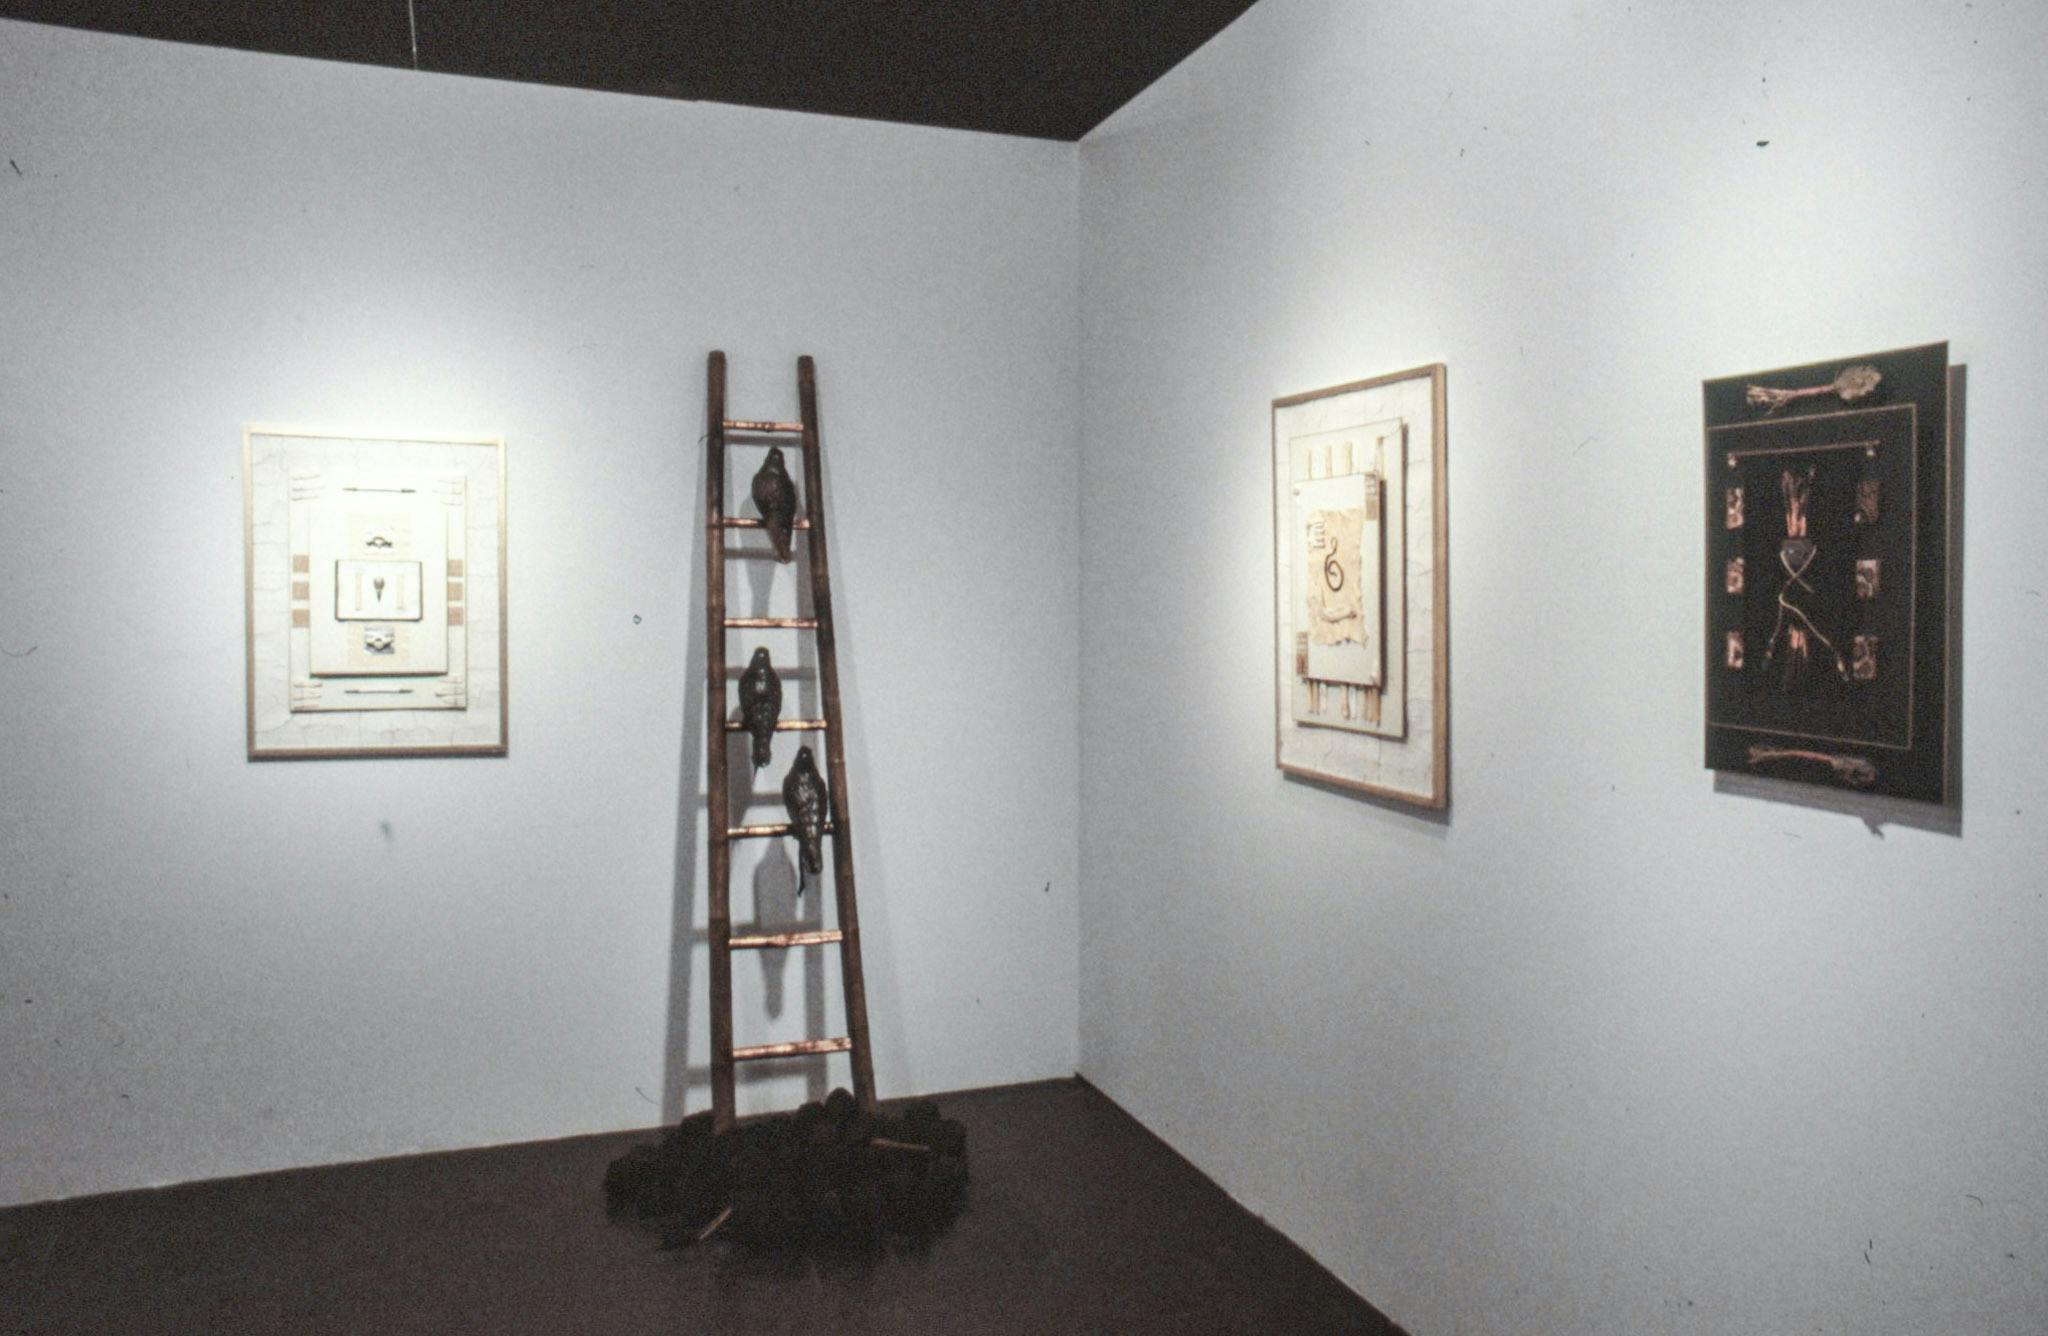 The corner of a gallery with several artworks on the wall. The works include framed collages, drawings, and leather pieces. One of the works is also a sculpture of a bronze ladder with birds.